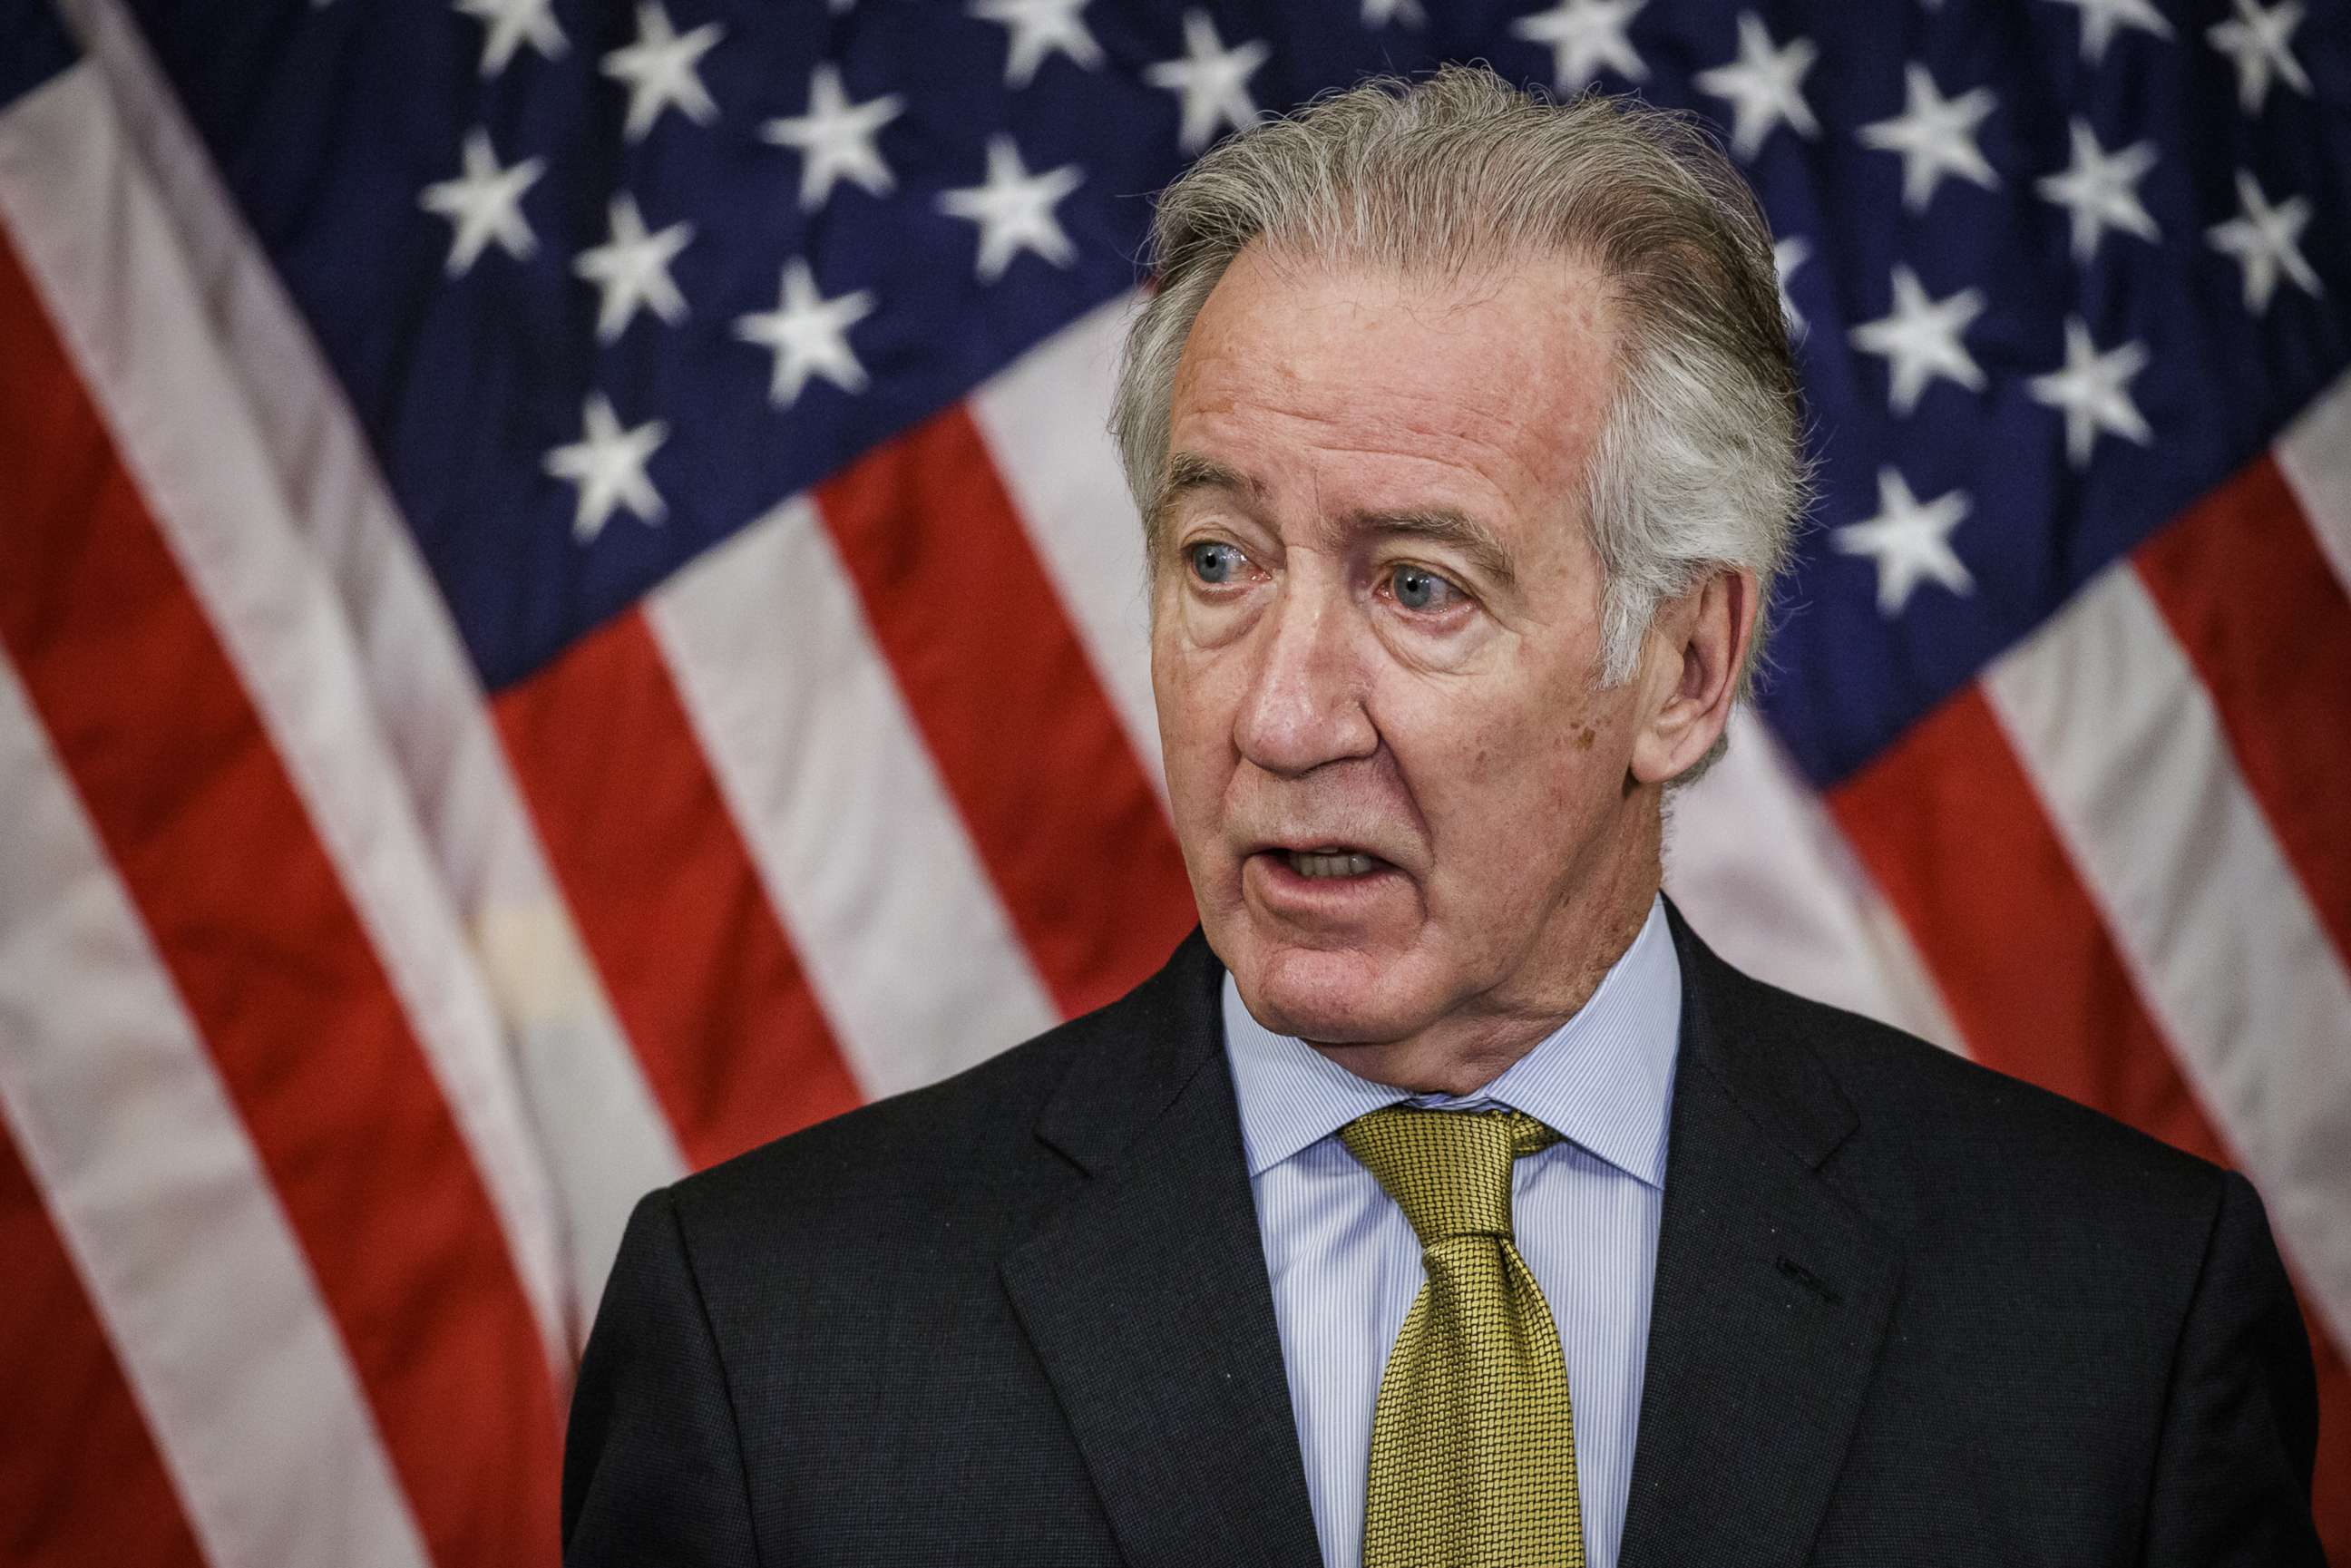 PHOTO: Richard Neal speaks during an event at the Capitol in Washington, D.C., Feb. 4, 2022.